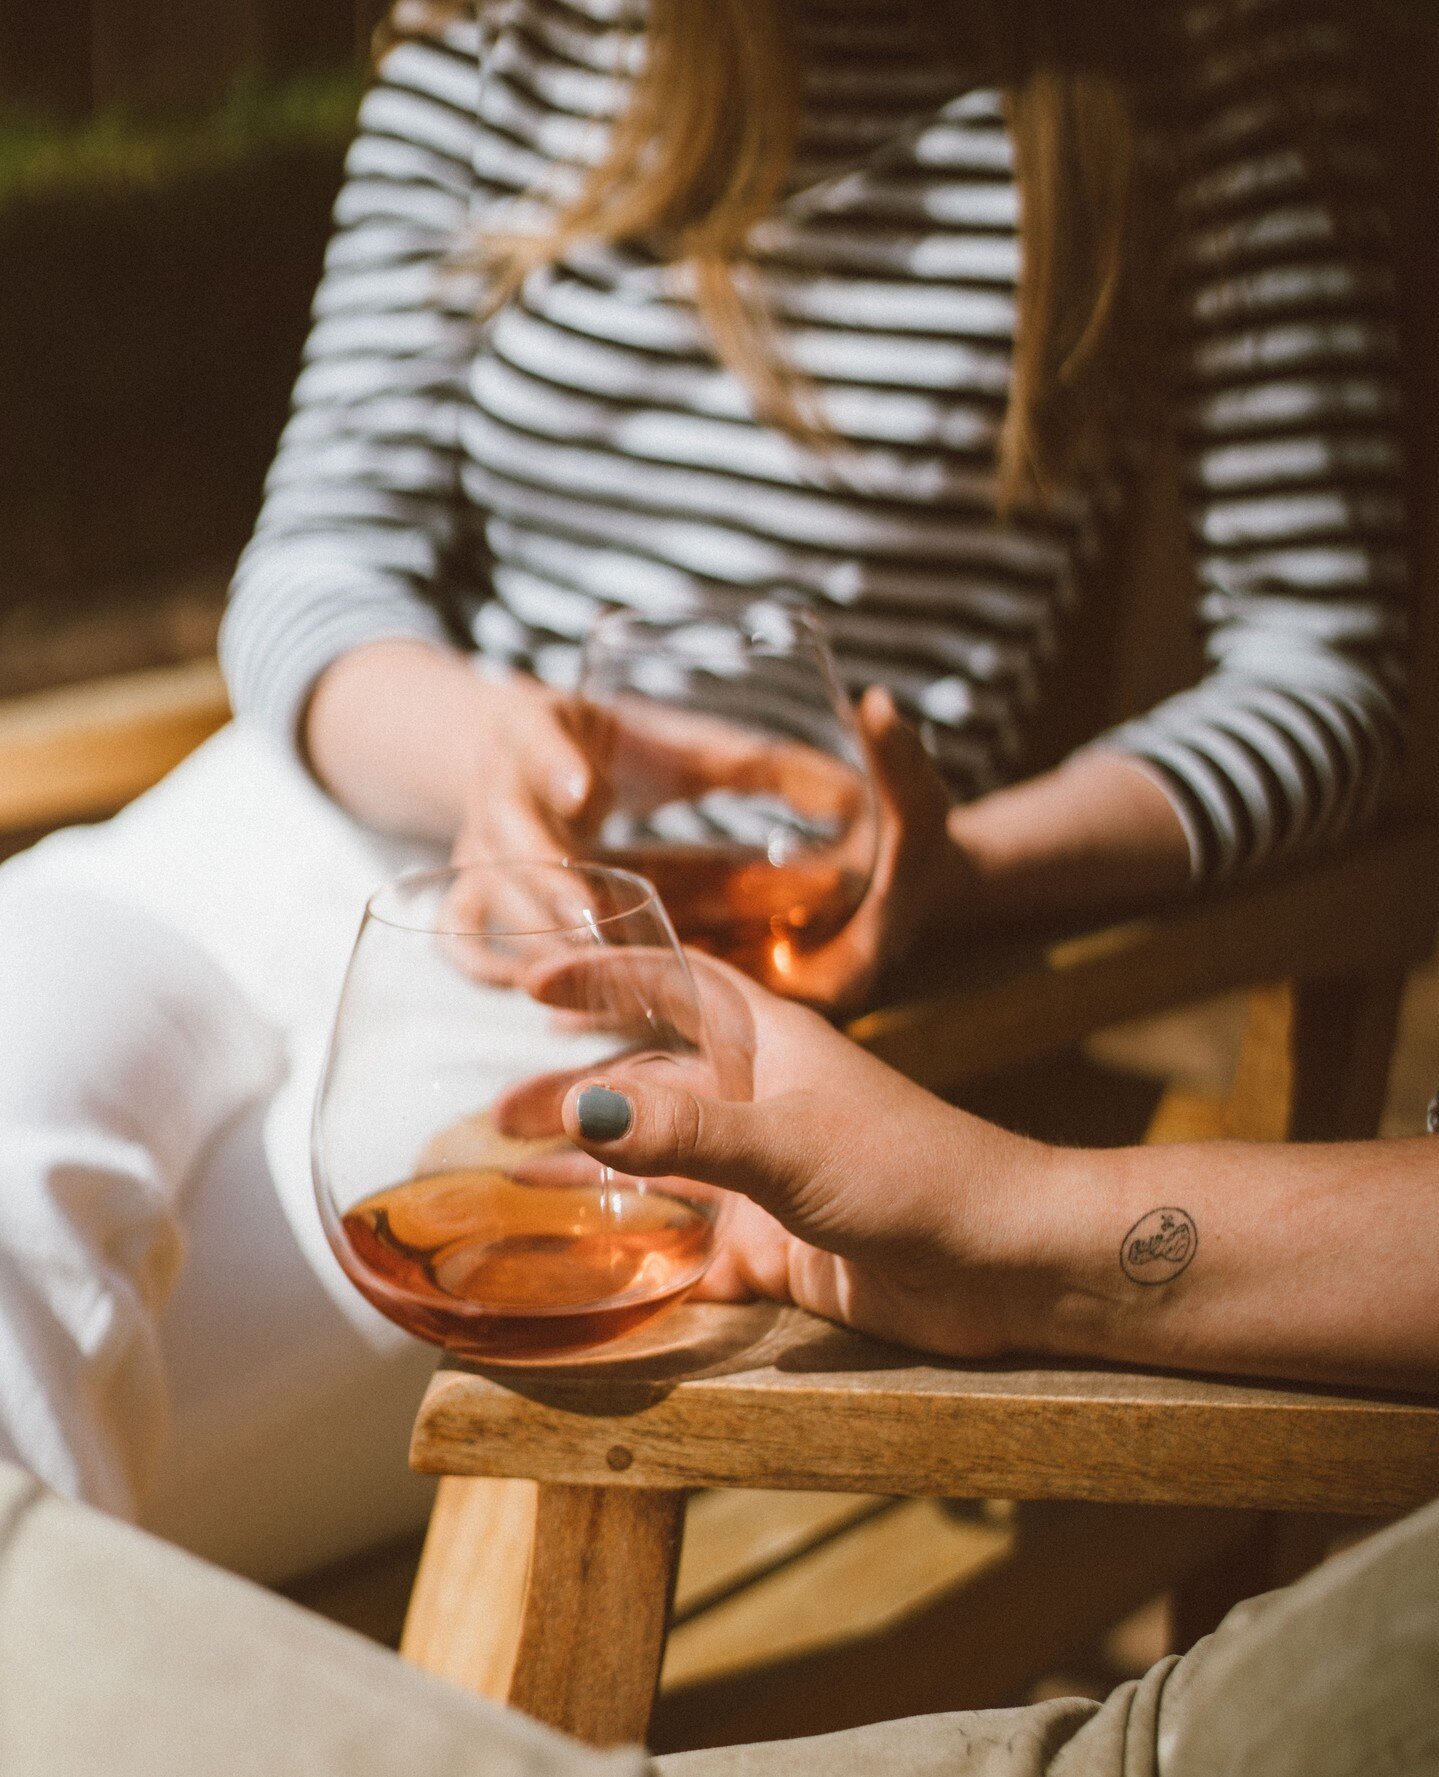 Ros&eacute; Season 🌸⁠
⁠
Don't miss a unique chance to stock up on beautiful Ros&eacute;! Until the end of the day, we invite you to enjoy a special offer on your purchase of 6+ bottles of our 2021 Ros&eacute; of Pinot Noir. This offer is automatical